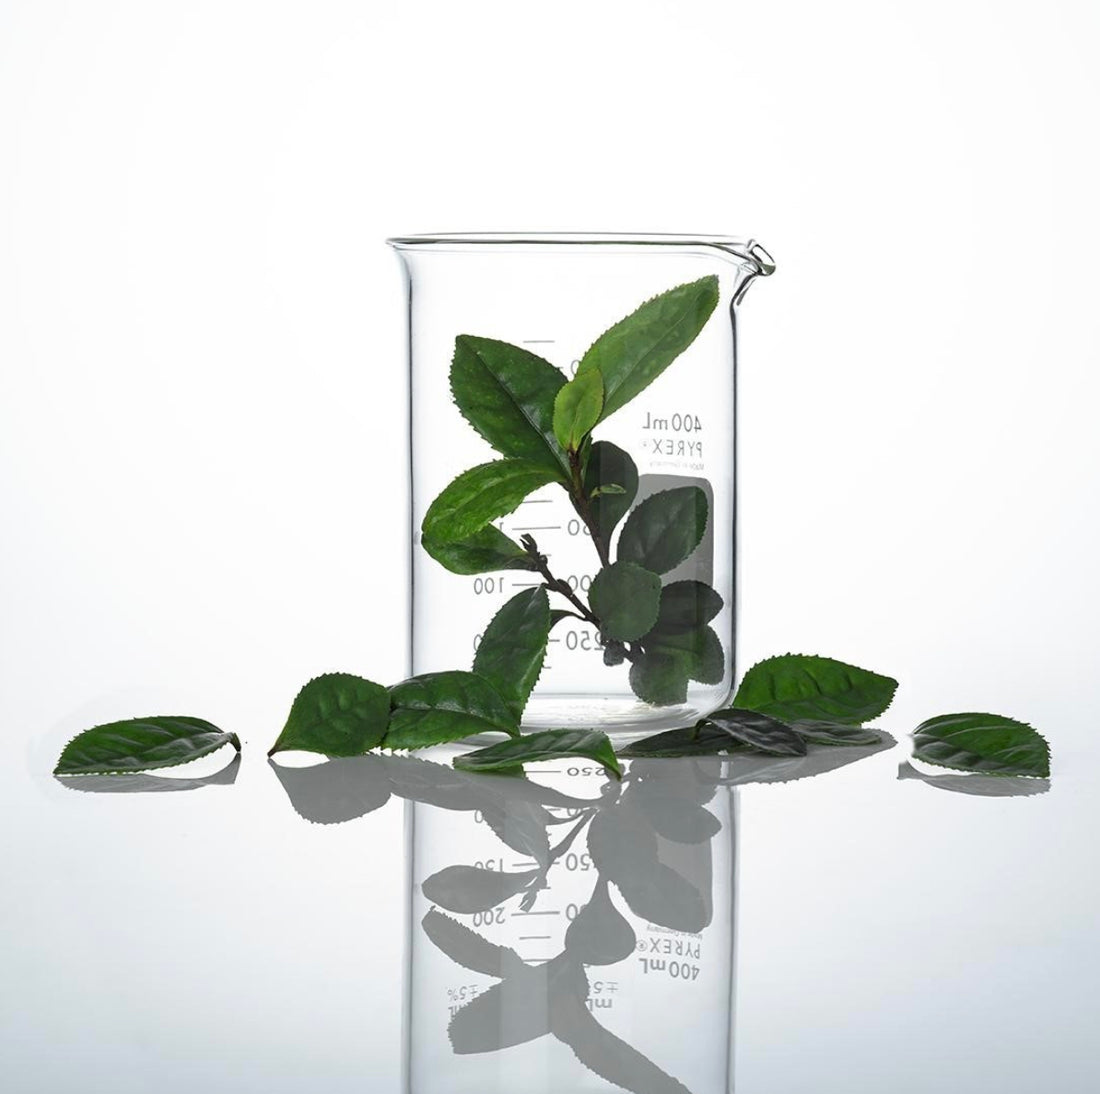 Image of beaker filled with leaves with leaves laying around the beaker